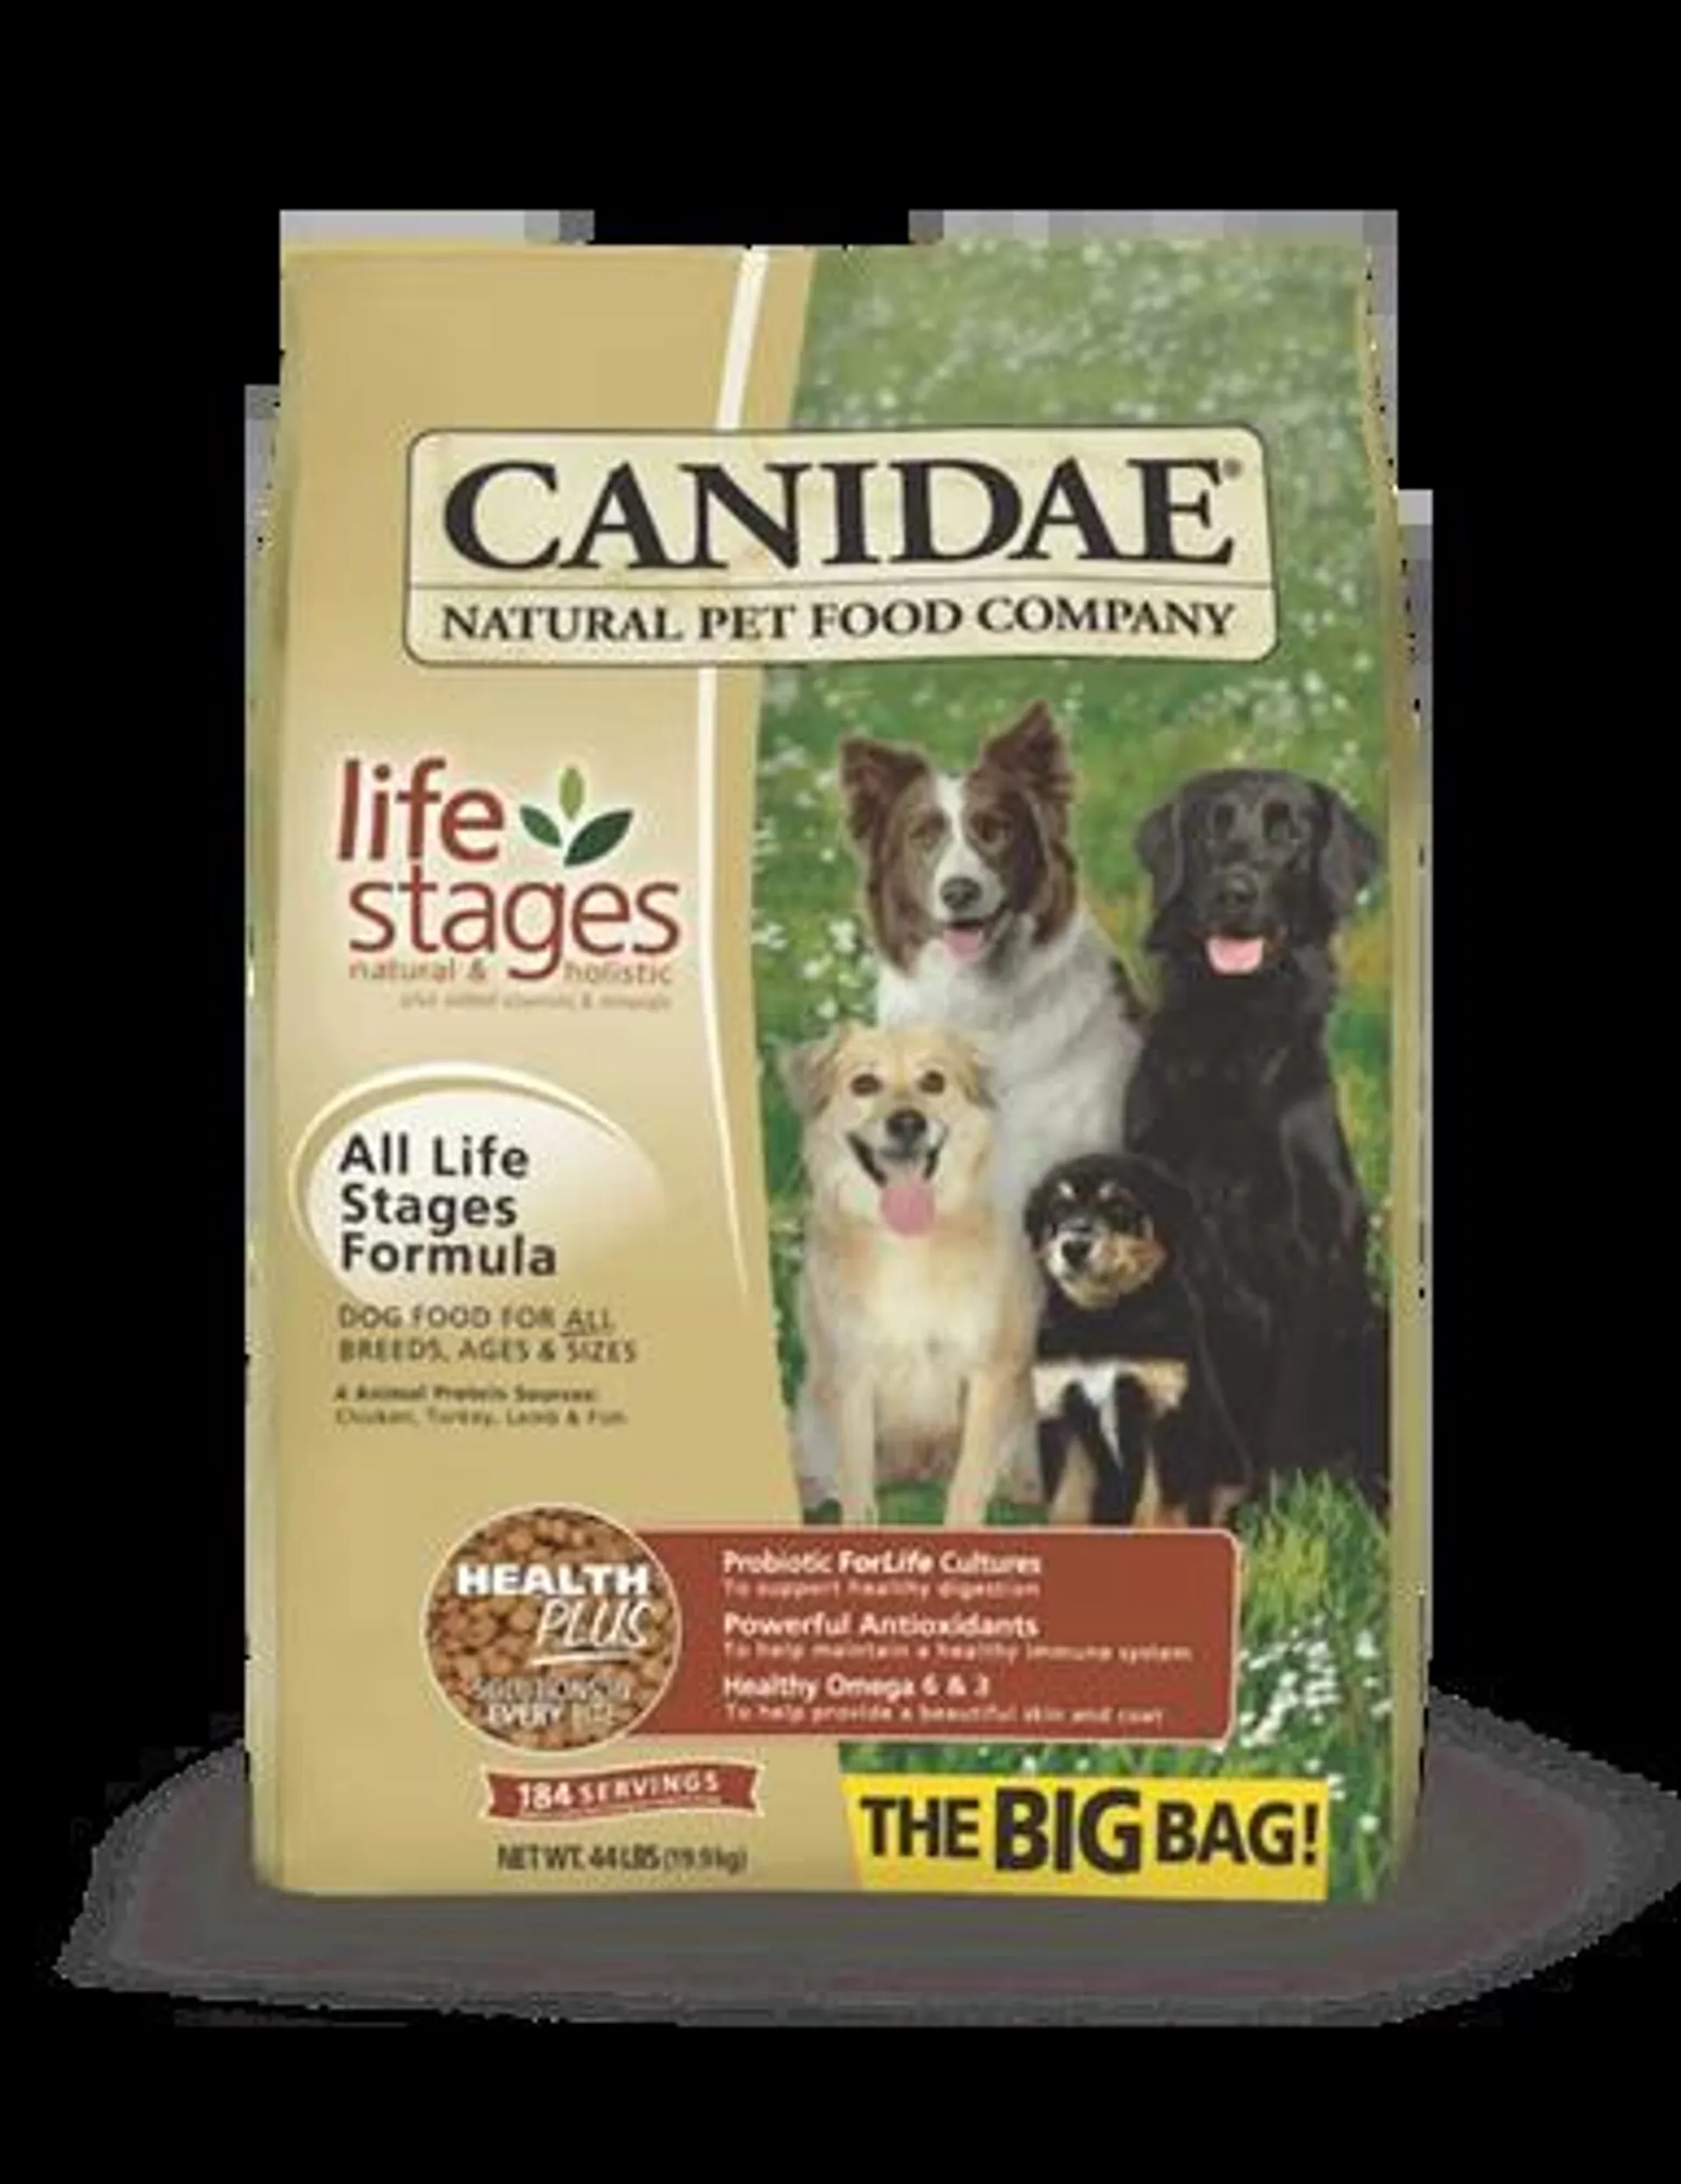 CANIDAE® All Life Stages Dog Food Made With Chicken, Turkey, Lamb & Fish Meals, 44 Pounds